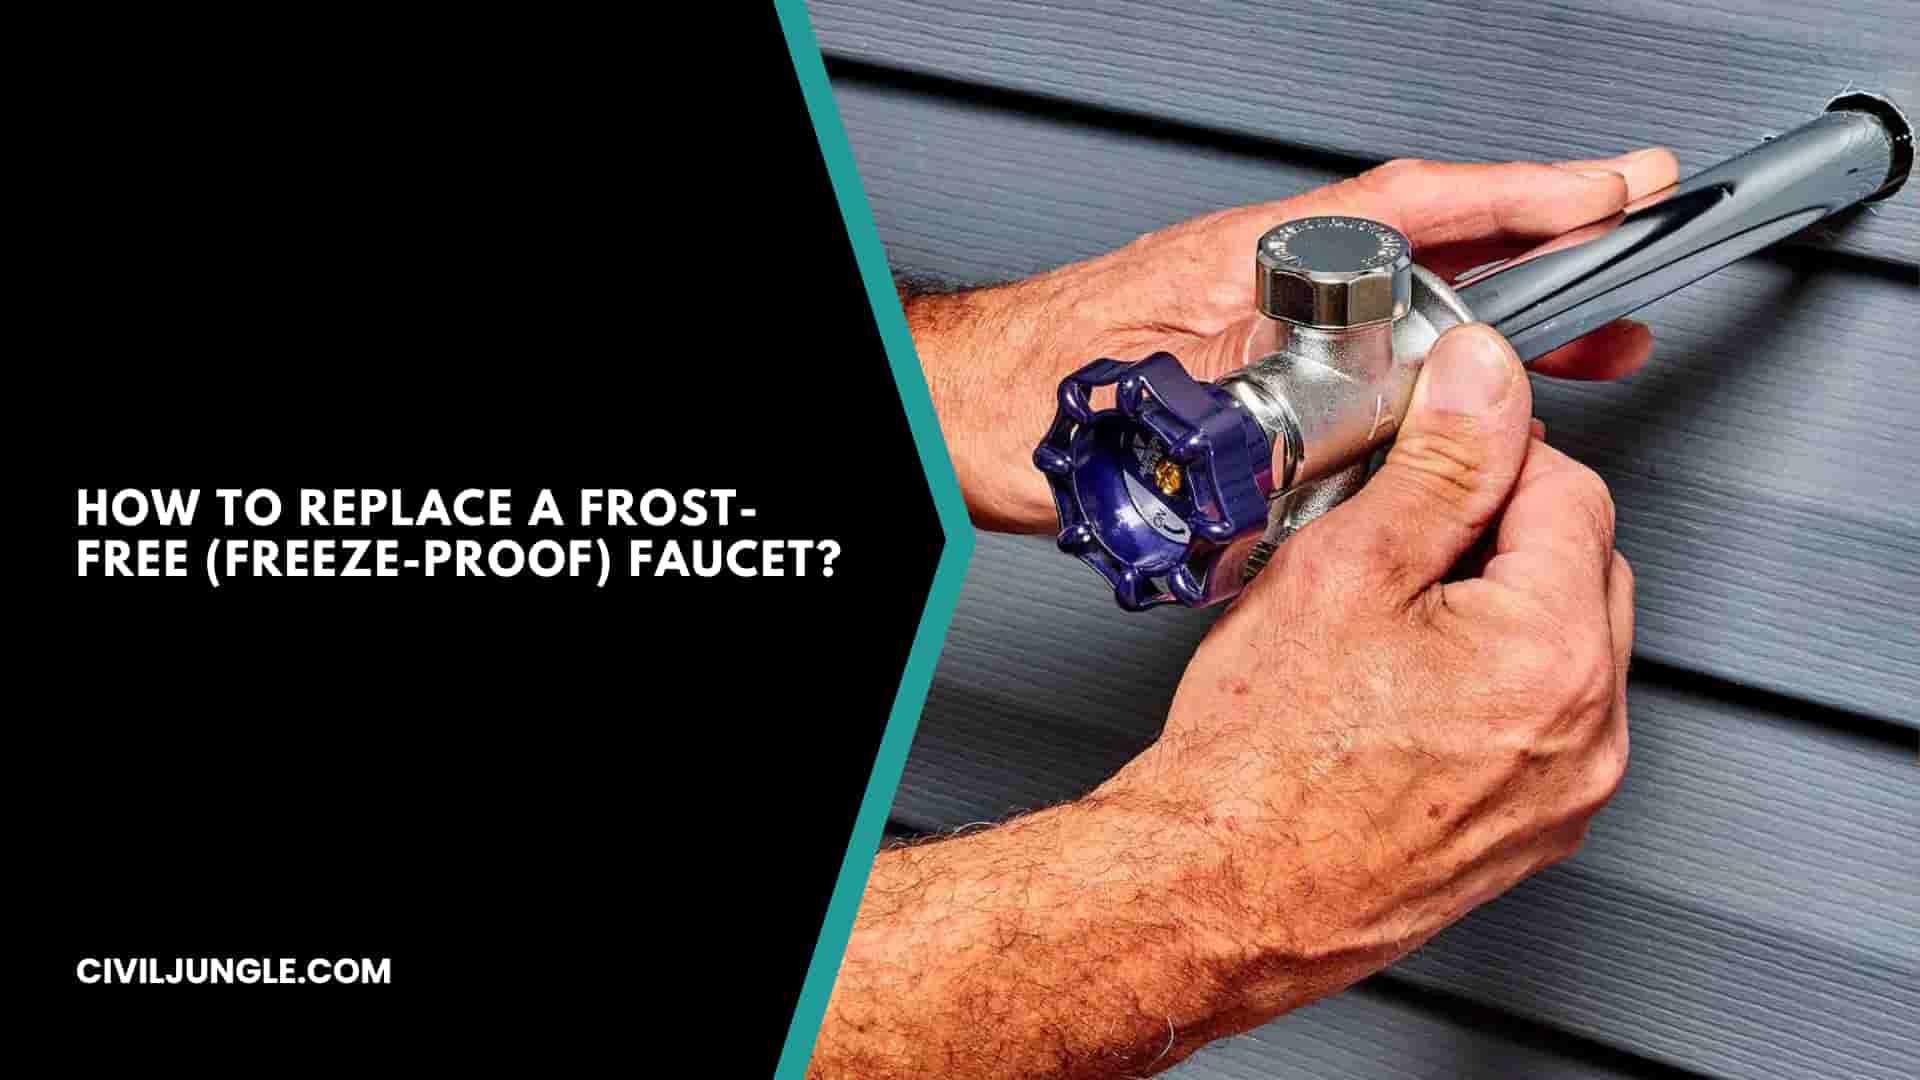 How to Replace a Frost-Free (Freeze-Proof) Faucet?